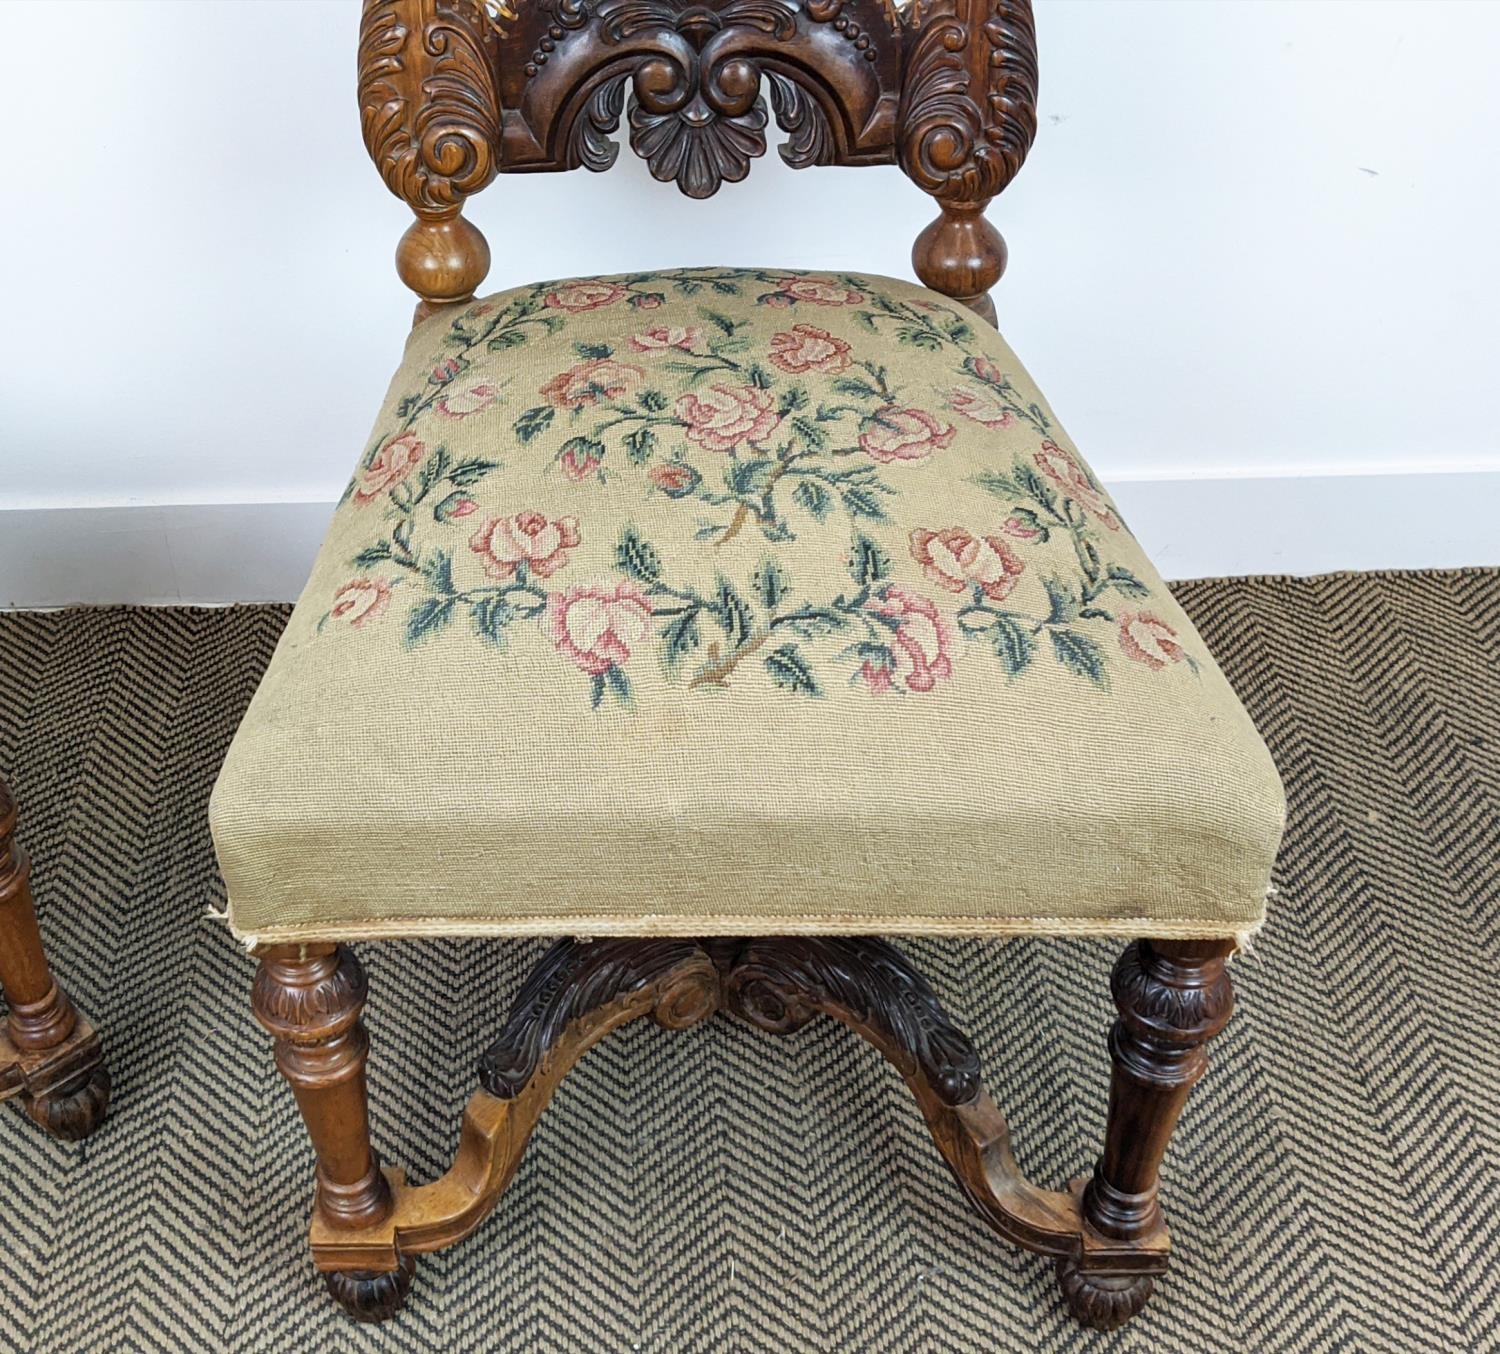 SIDE CHAIRS, a pair, 19th century Dutch with carved showframes with caned back panels and - Image 5 of 10